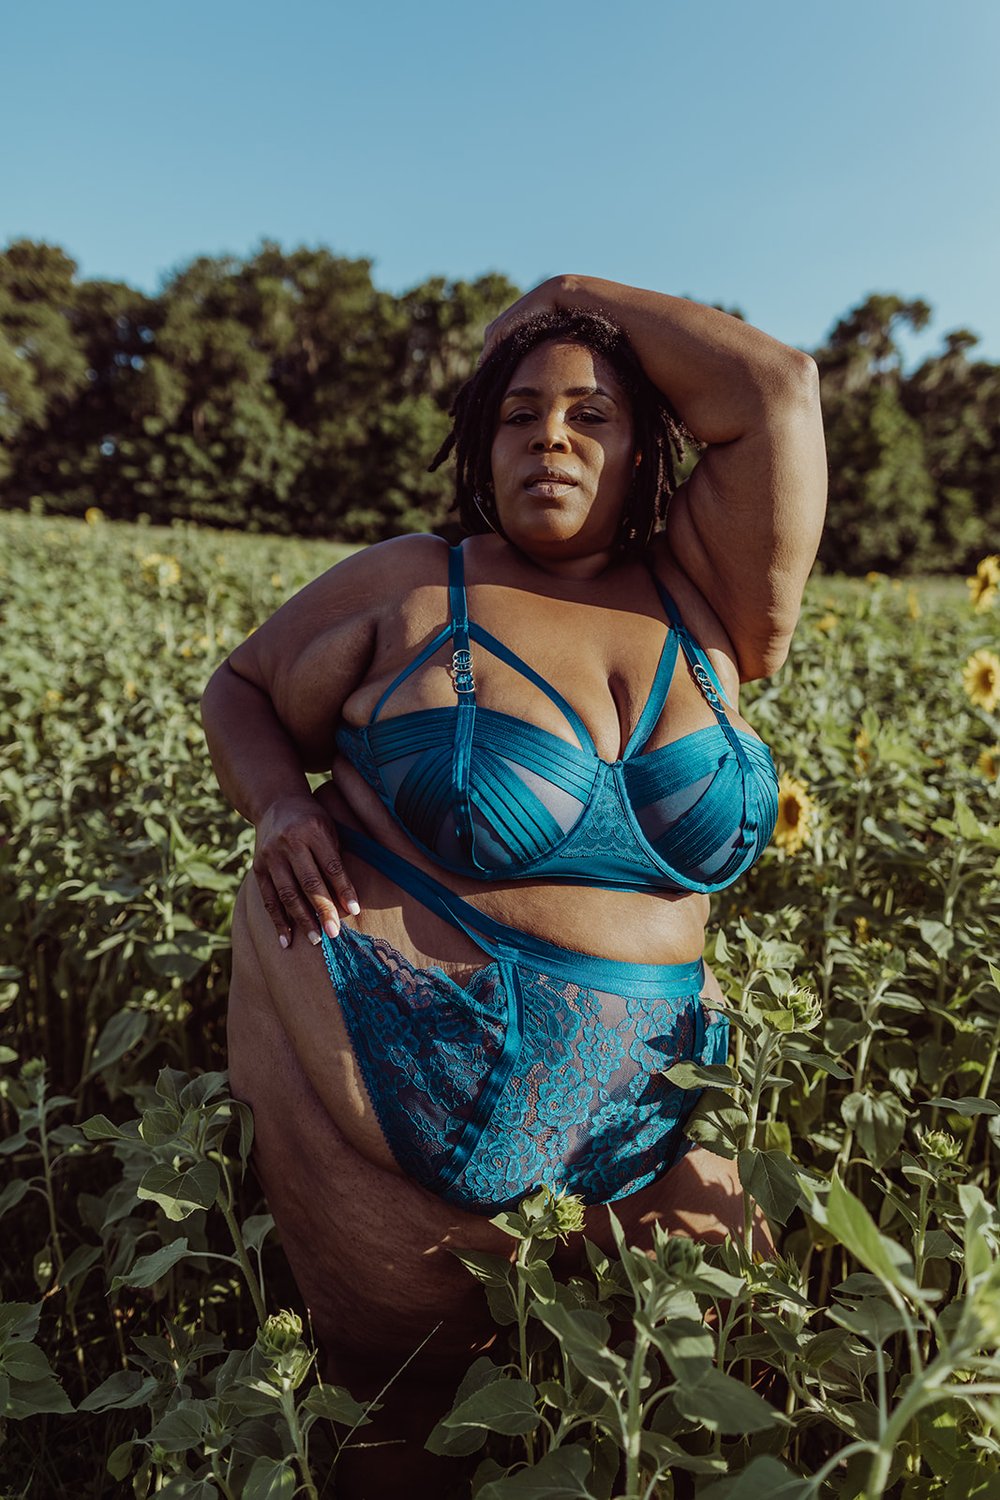  black woman looks into the camera while resting one arm above her head during her boudoir shoot in a sunflower field  